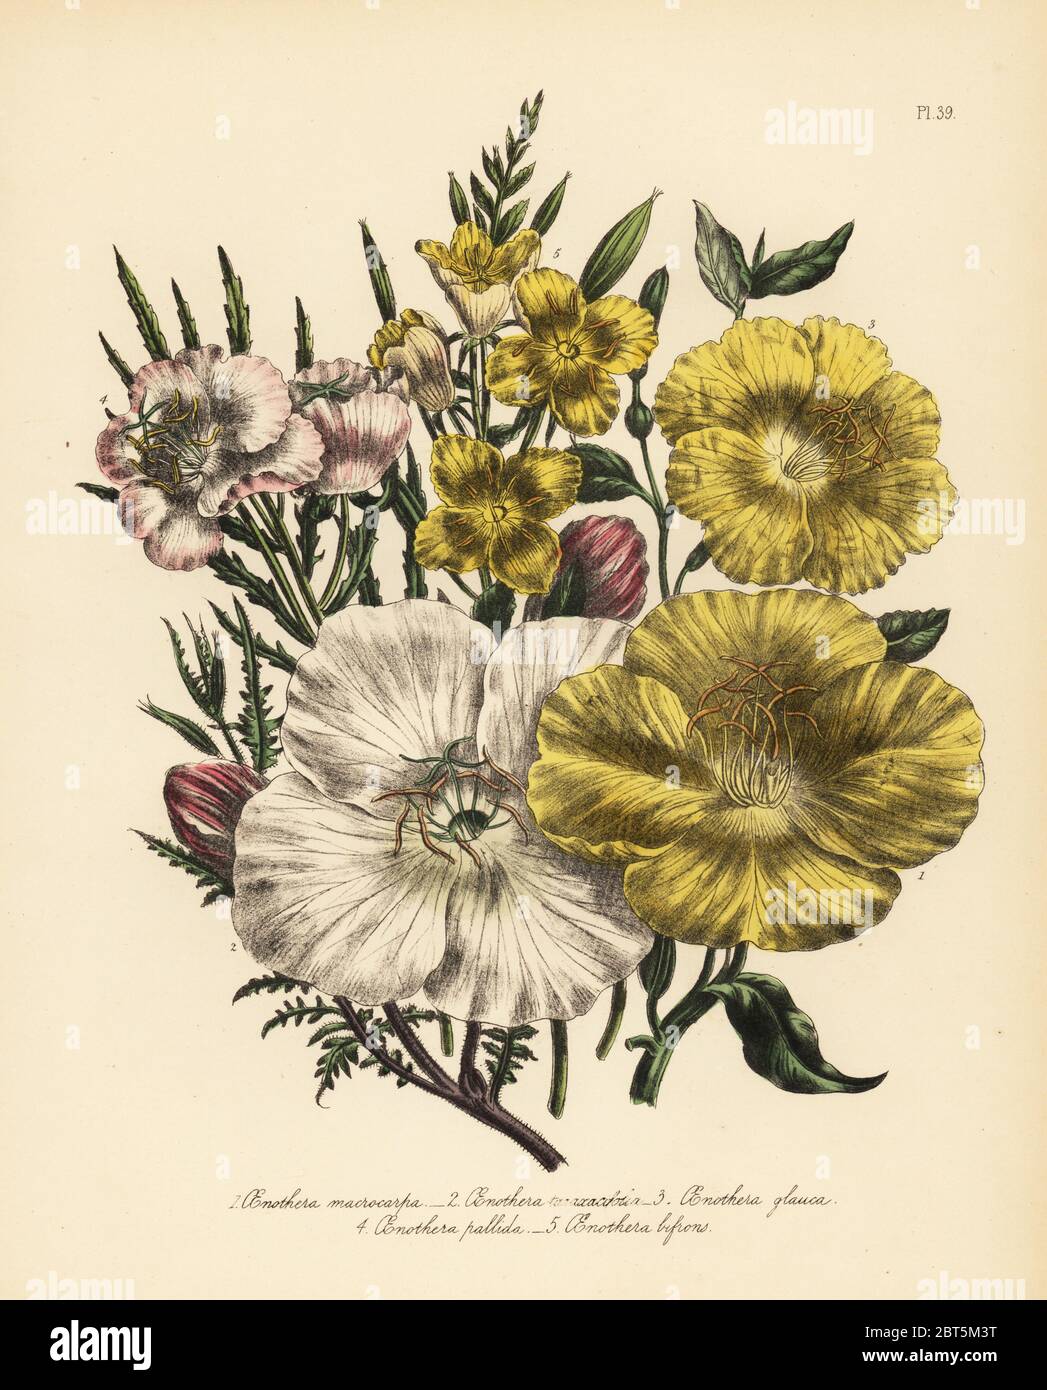 Large-fruited evening primrose, Oenothera macrocarpa, dandelion-leaved evening primrose, Oe. taraxacifolia, glaucous-leaved evening primrose, Oe. glauca, pale-flowered evening primrose, Oe. pallida, and heart-leaved evening primrose, Oe. bipons. Handfinished chromolithograph by Henry Noel Humphreys after an illustration by Jane Loudon from Mrs. Jane Loudon's Ladies Flower Garden of Ornamental Perennials, William S. Orr, London, 1849. Stock Photo